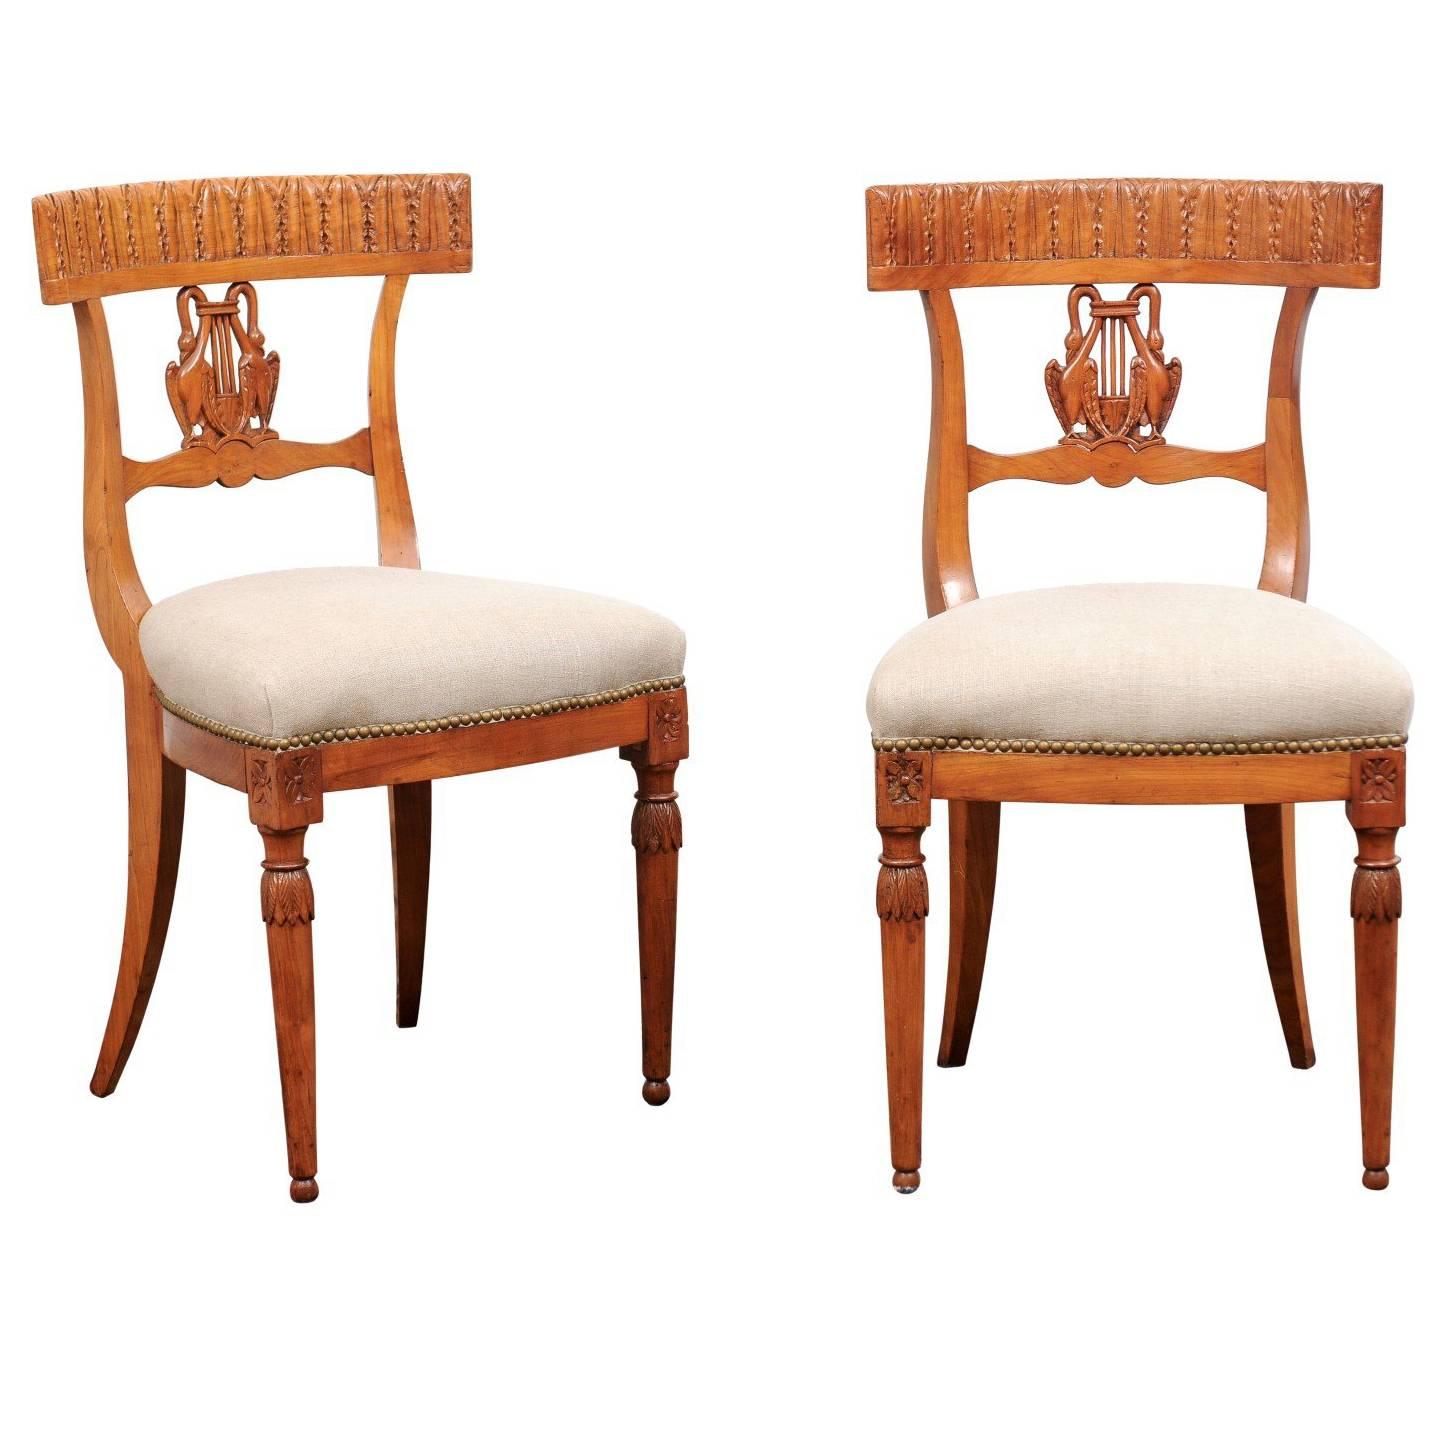 Pair of Italian Neoclassical Side Chairs with Swans and Lyre from the 1850s